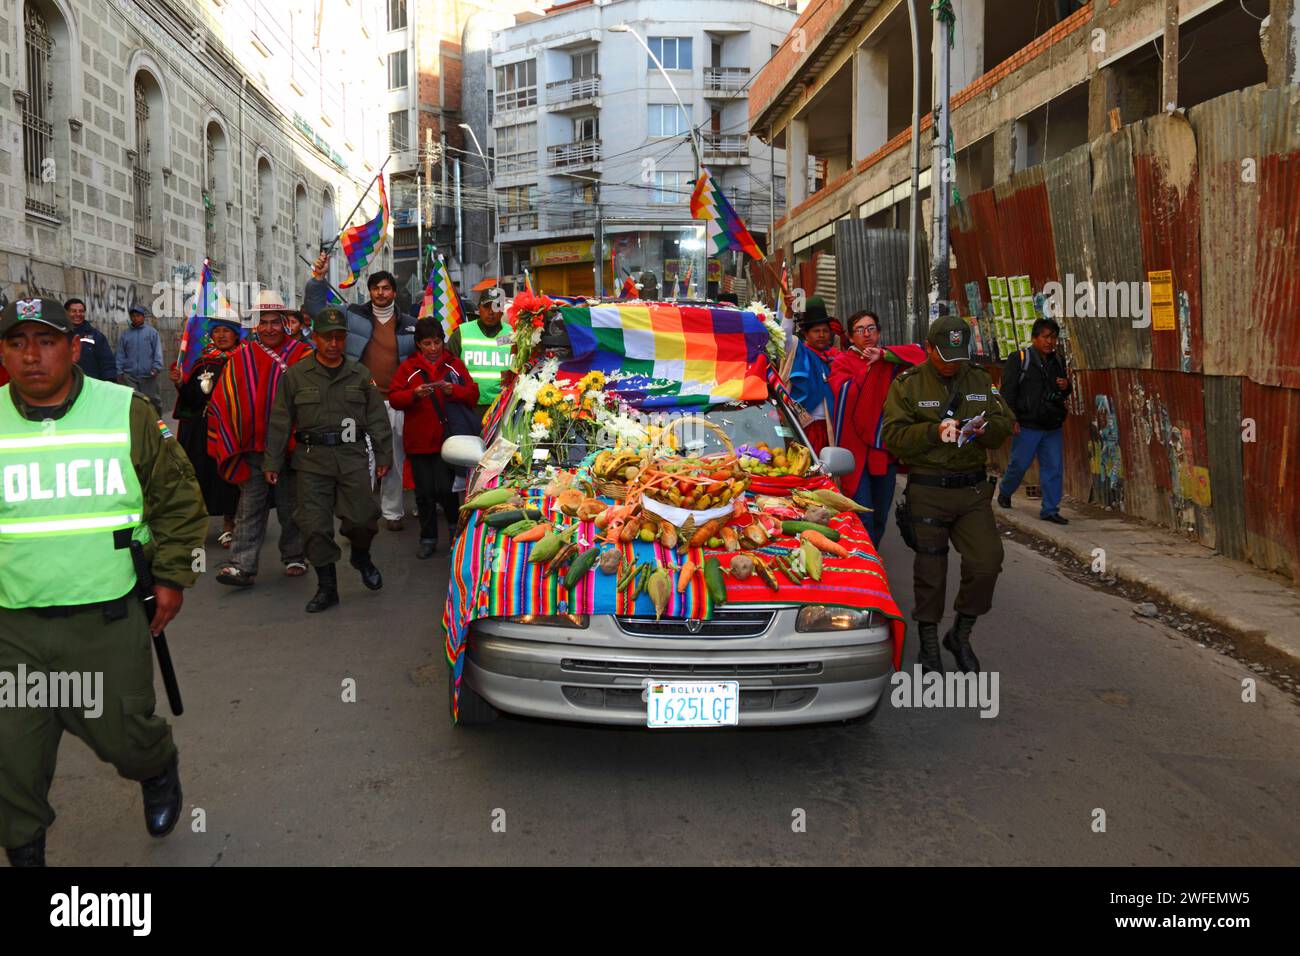 La Paz, BOLIVIA; 24th January 2015. Bolivian police escort an ancient illa (or statue) of an Ekeko (an Aymara god of abundance) as it is paraded on top of a decorated car through the streets of La Paz to celebrate its first appearance at the Alasitas festival, which starts today. The statue is around 2000 years old and was made by the Pucara culture. It was taken from the archaeological site of Tiwanaku to Switzerland in 1858, and returned to Bolivia by the Berne History Museum in November 2014. Stock Photo